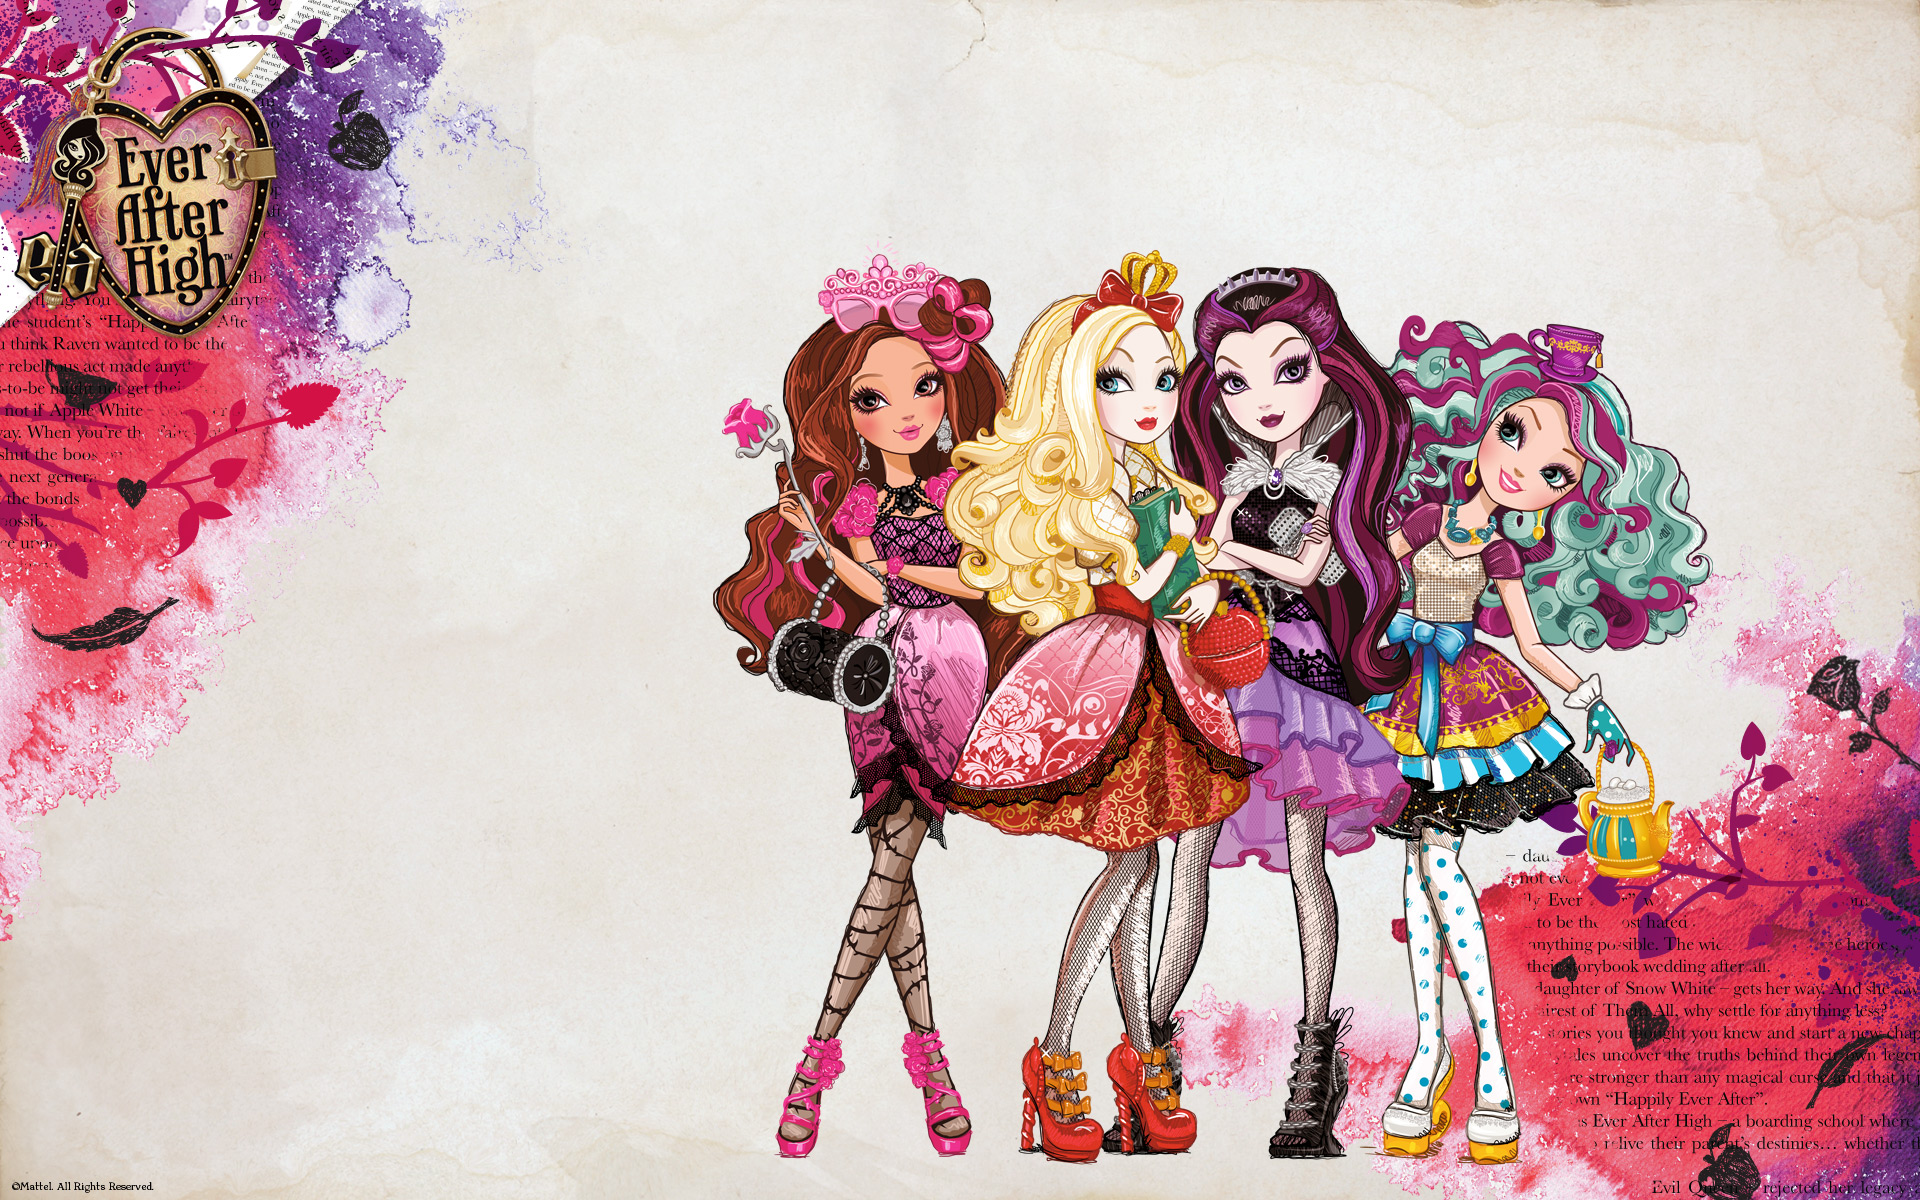 ever after high, tv show, doll, fairy tale, fantasy, fashion, mattel, style